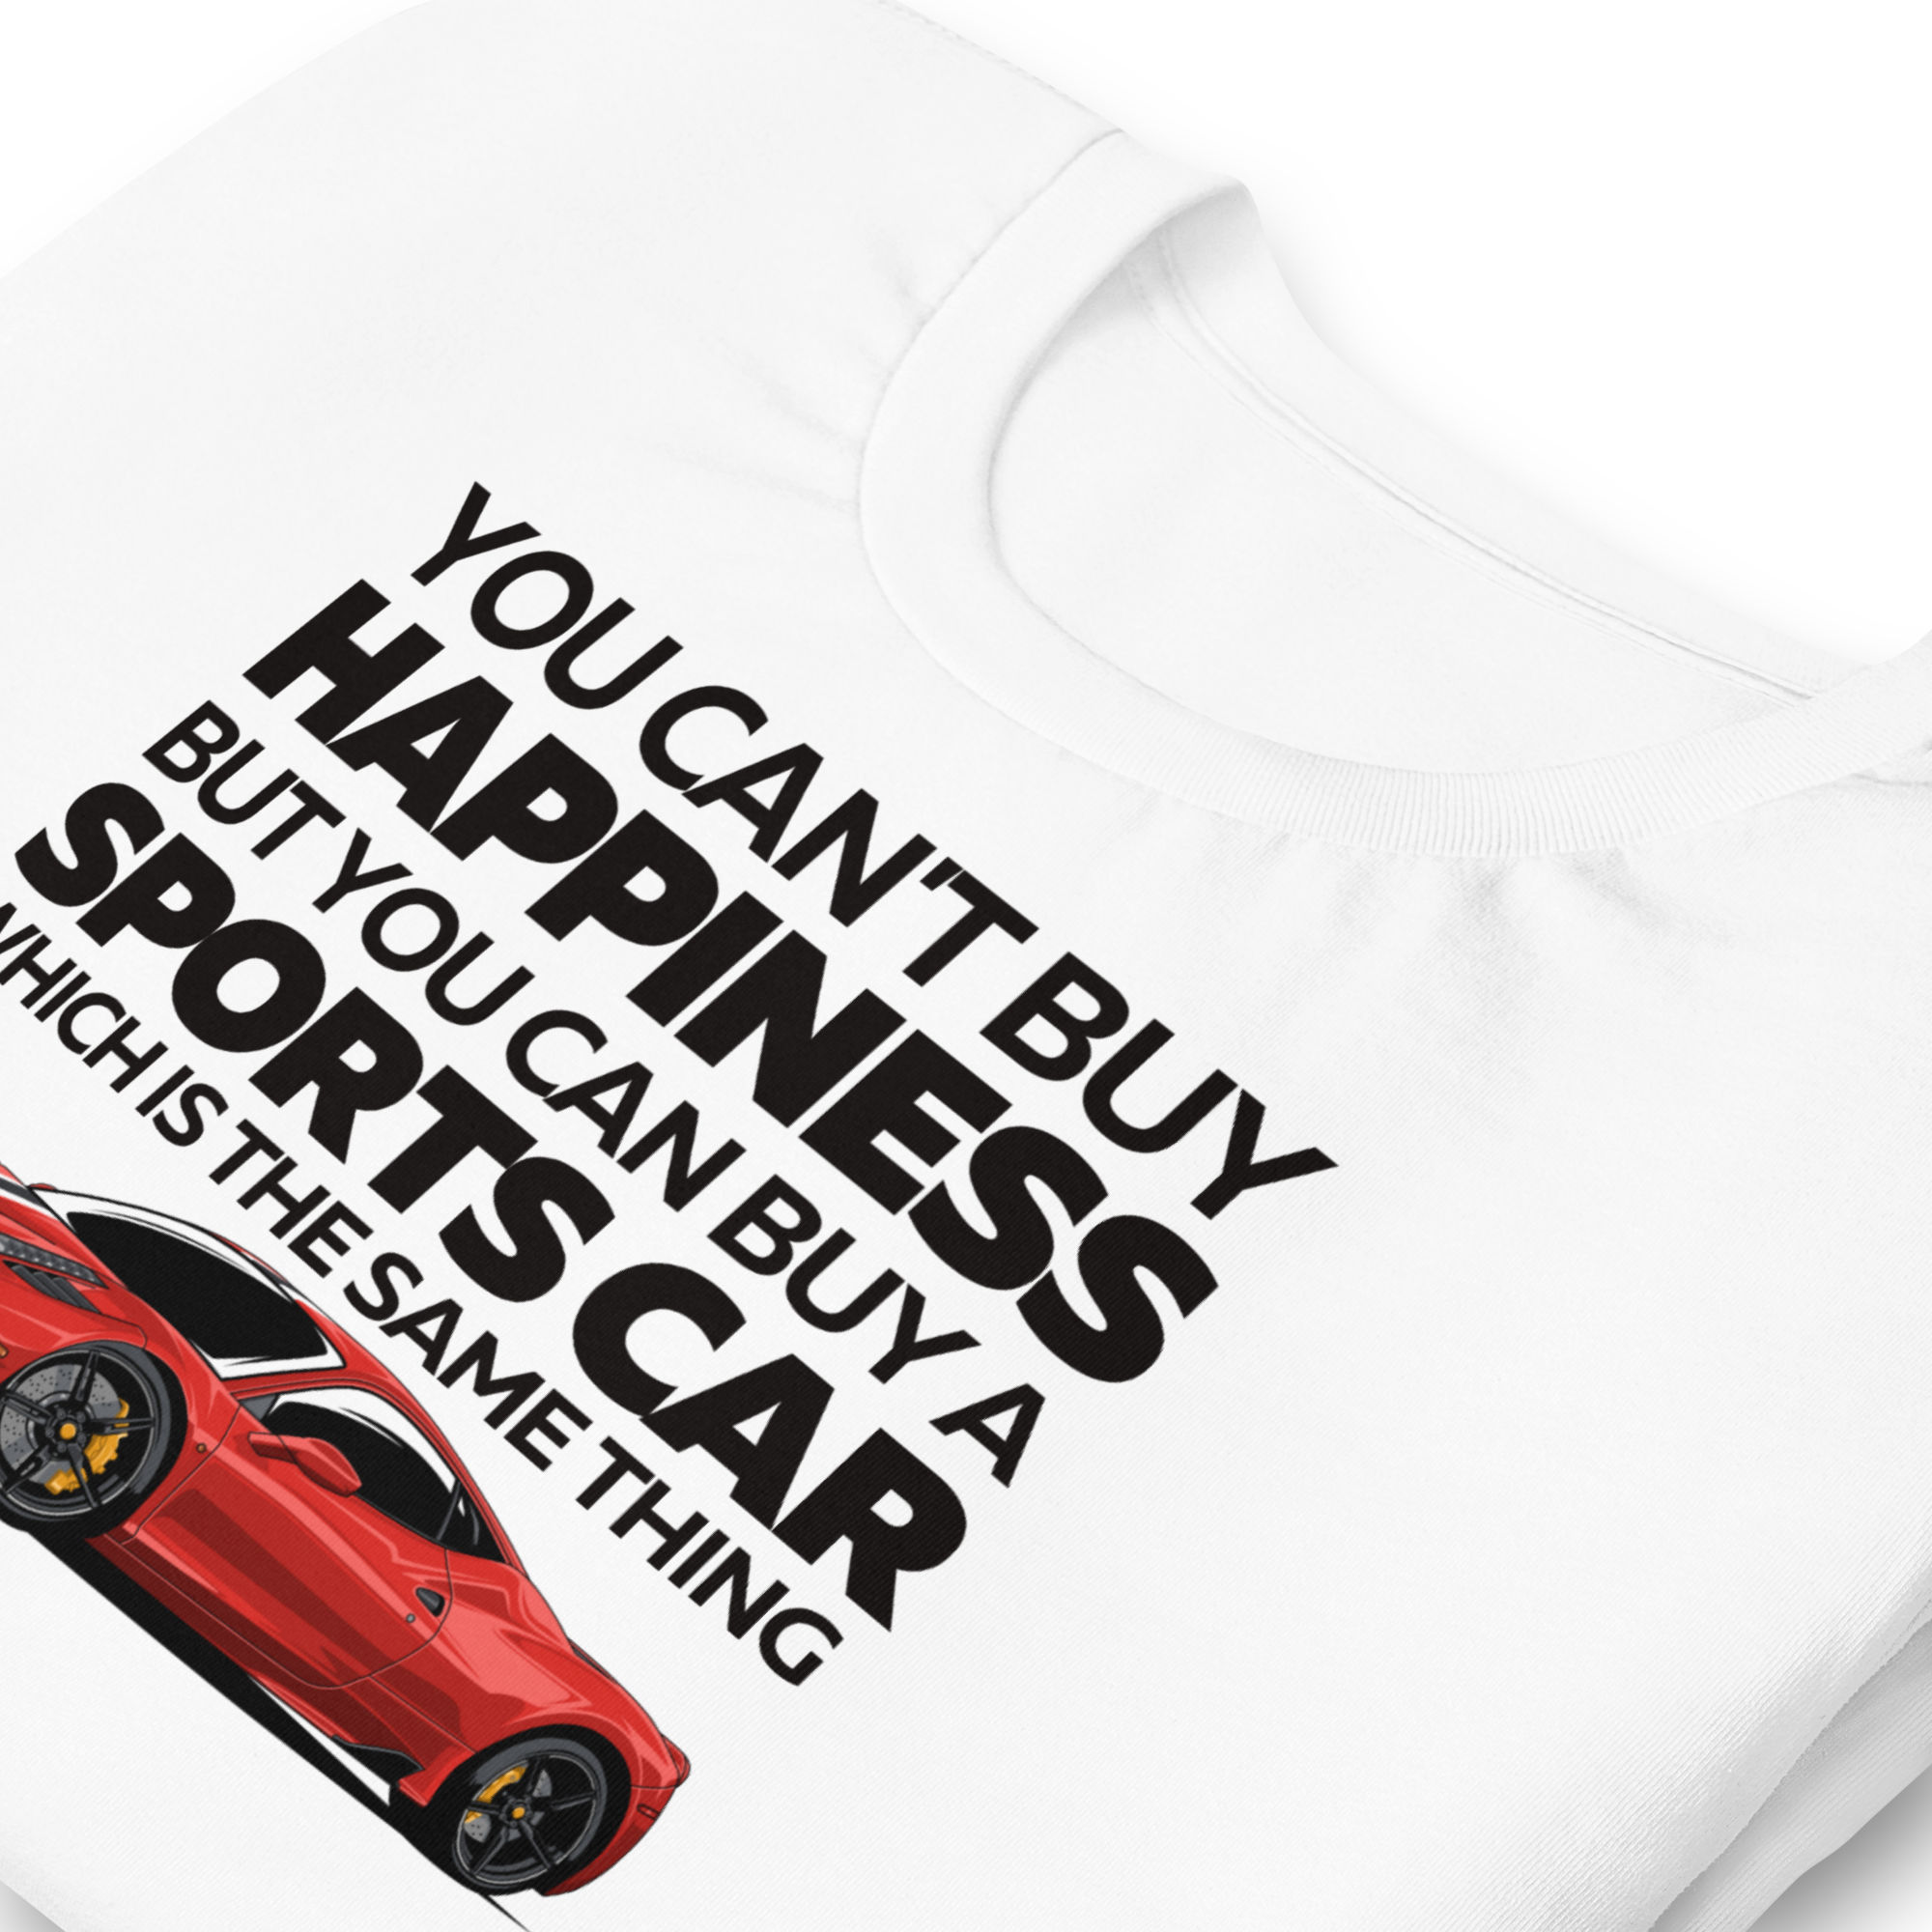 You Can't Buy Happiness - Sports Car